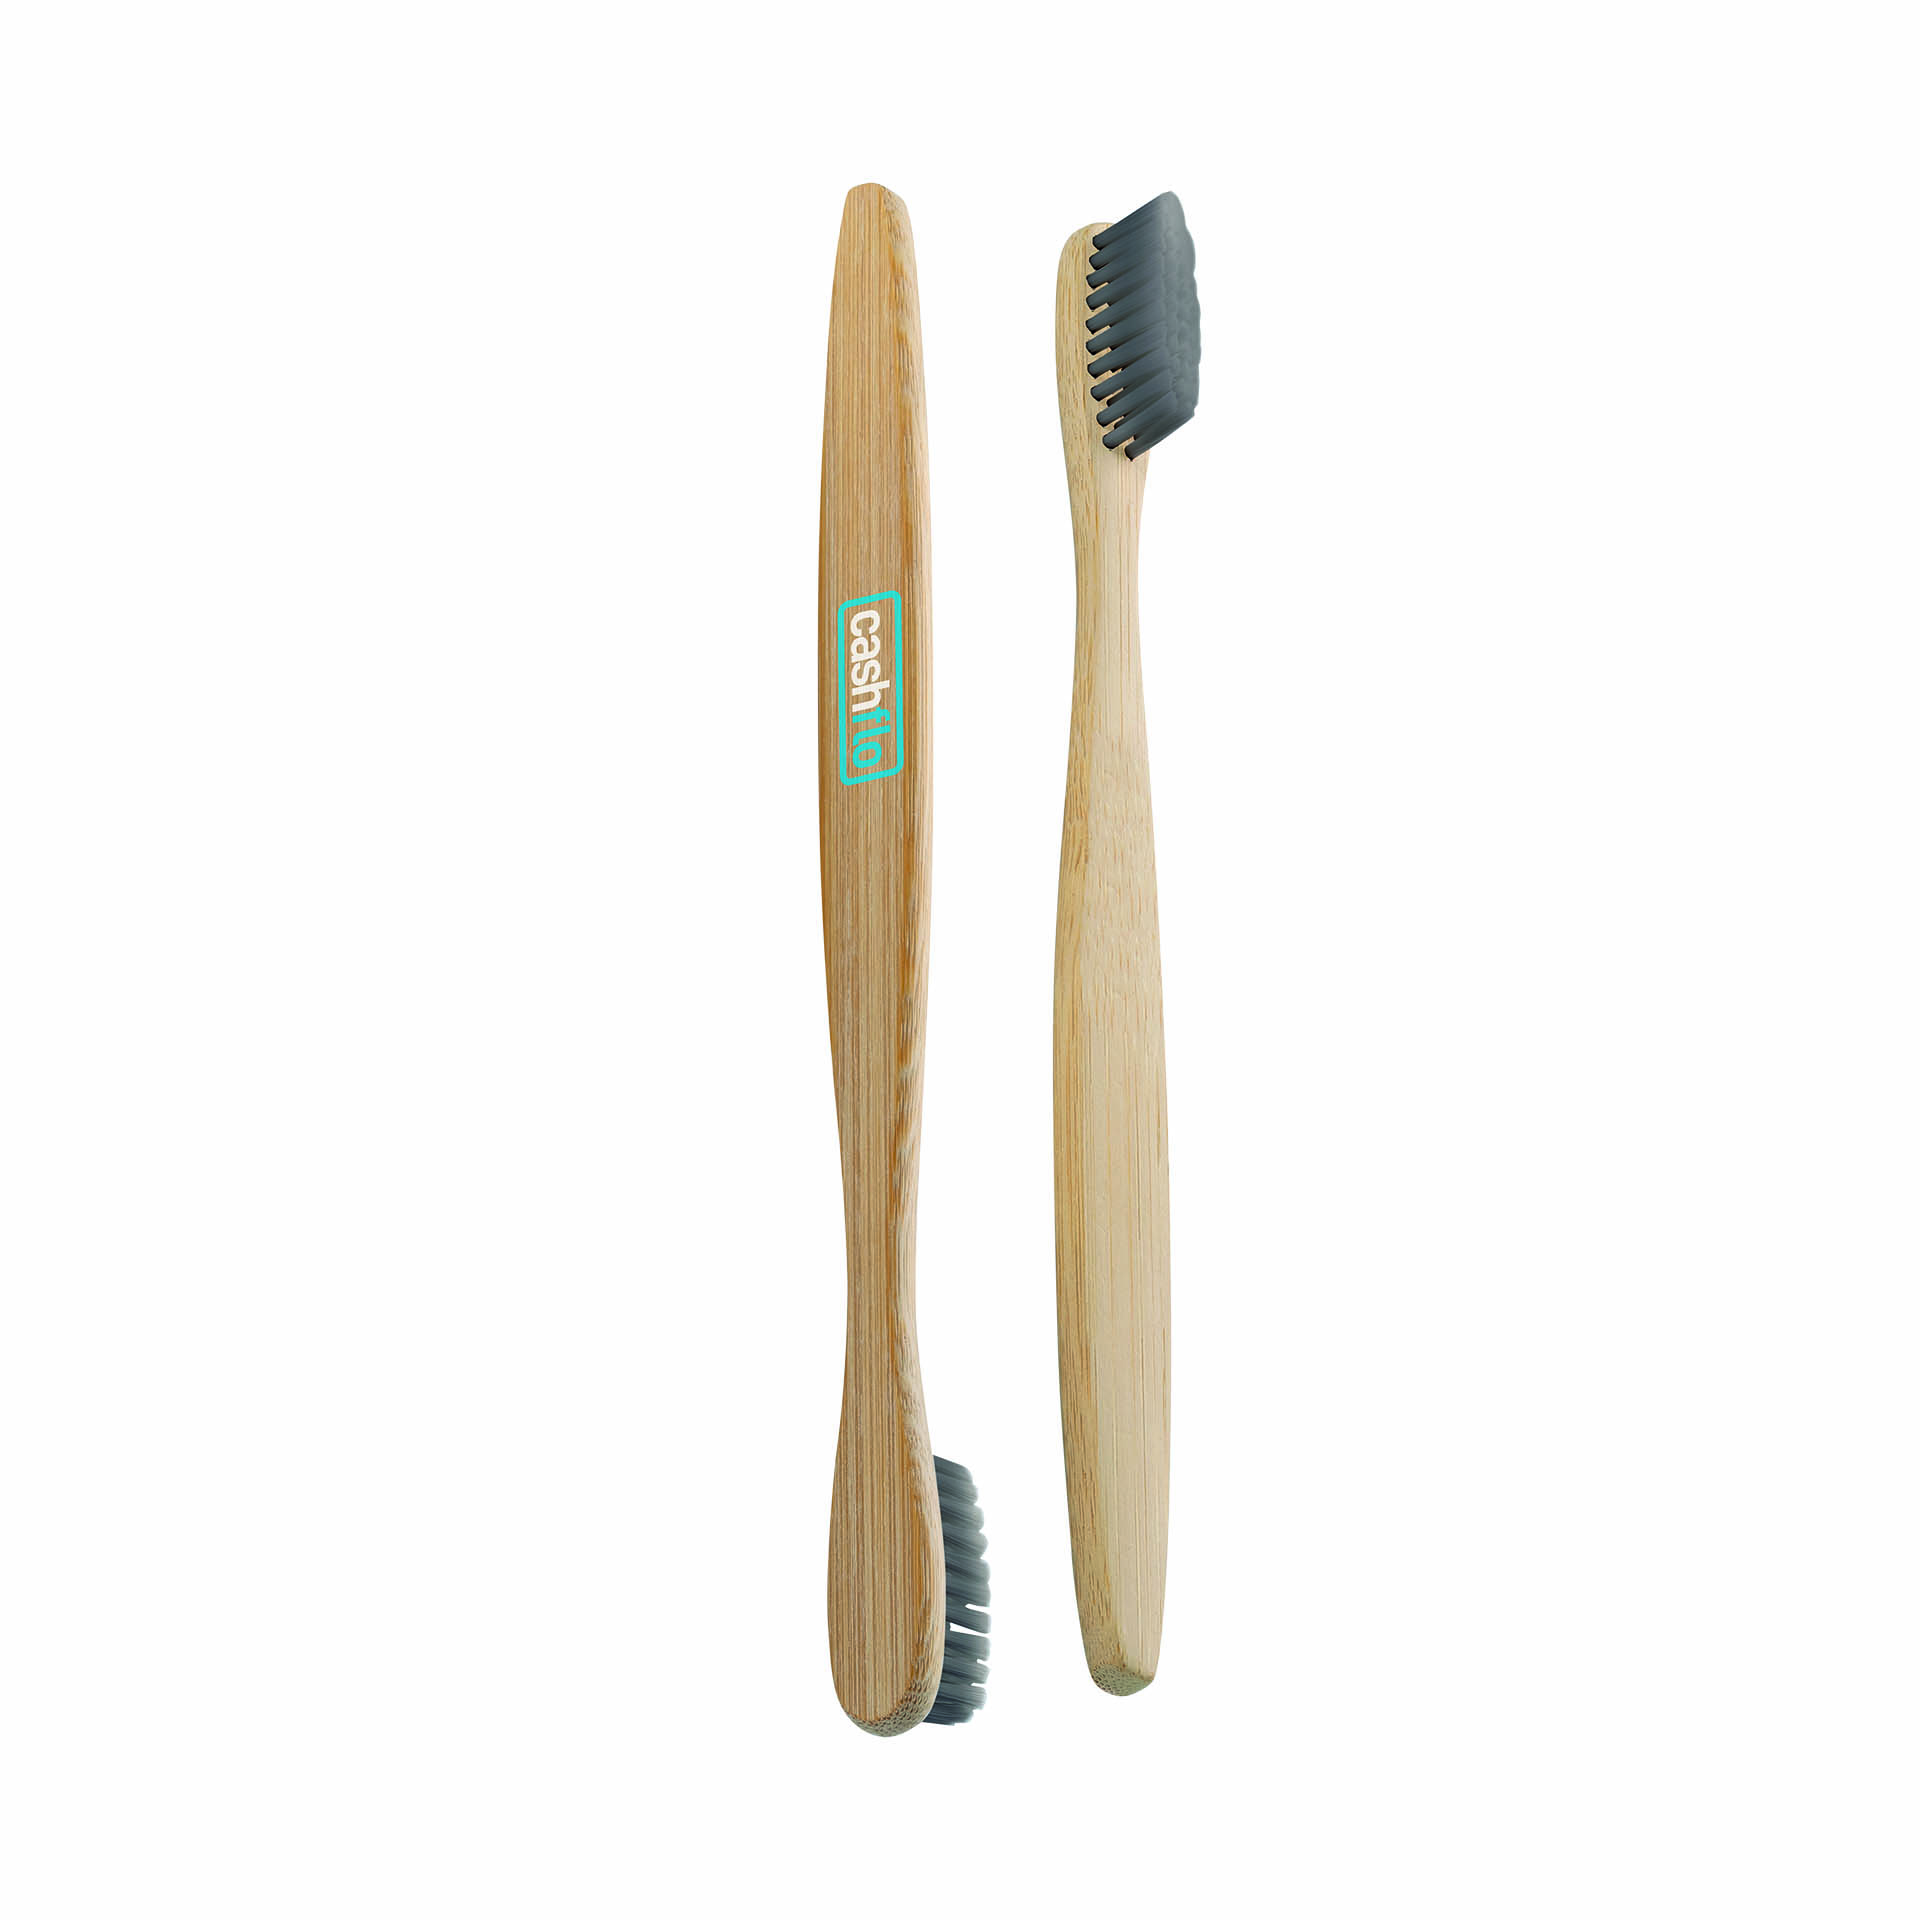 The Green & Good Toothbrush made from sustainable bamboo. Eco-friendly toothbrush with charcoal-nylon bristles. Handle is 100% biodegradable. A great plastic-free option.